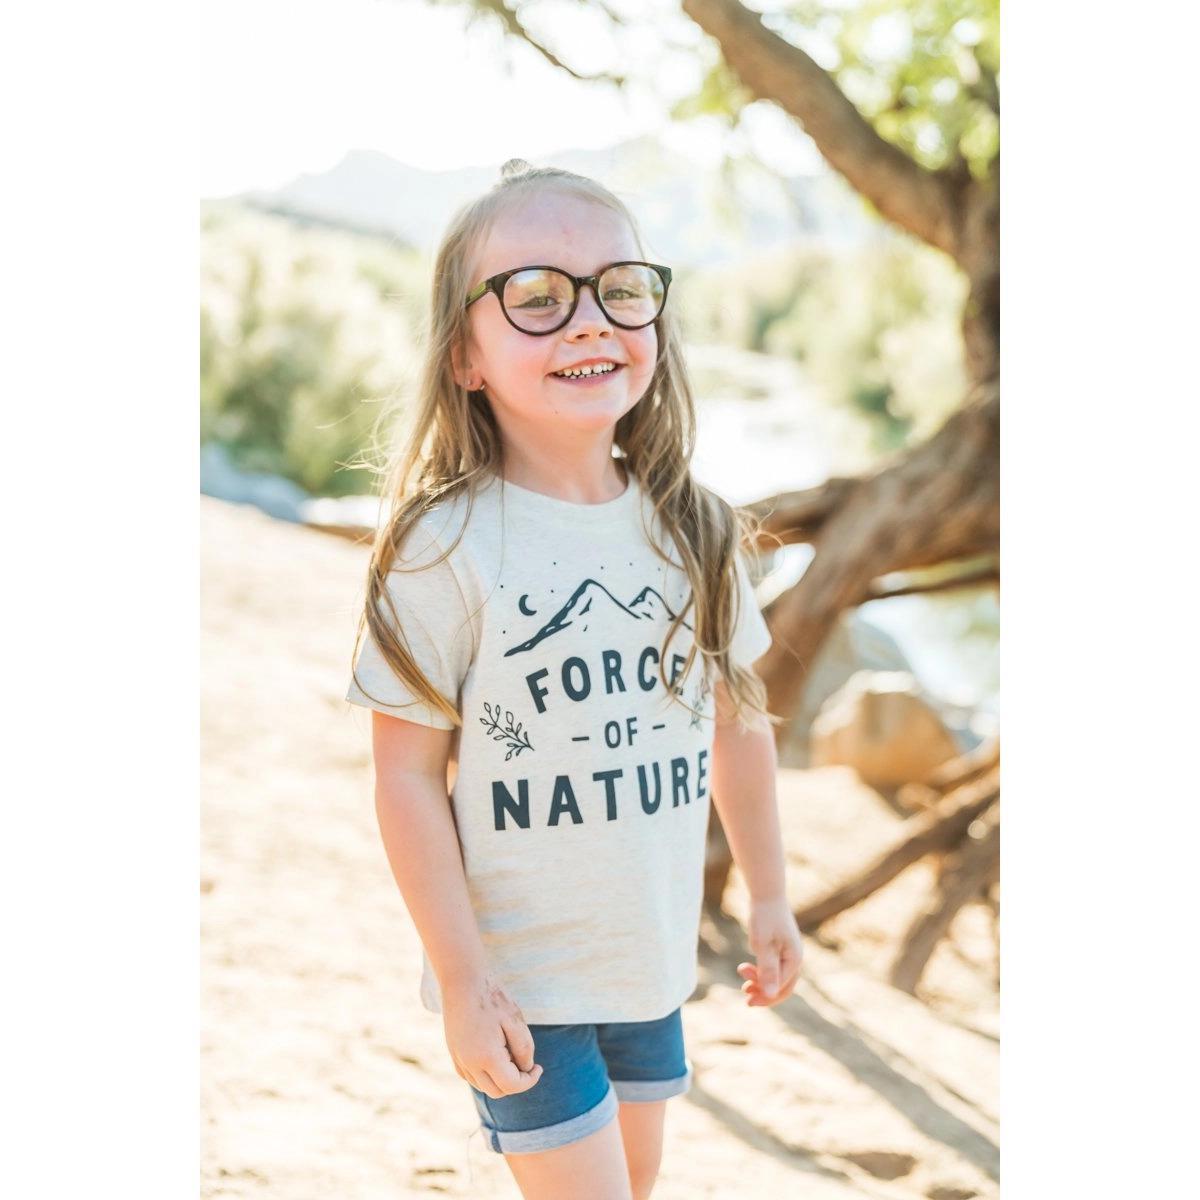 Force of Nature Toddler Tee